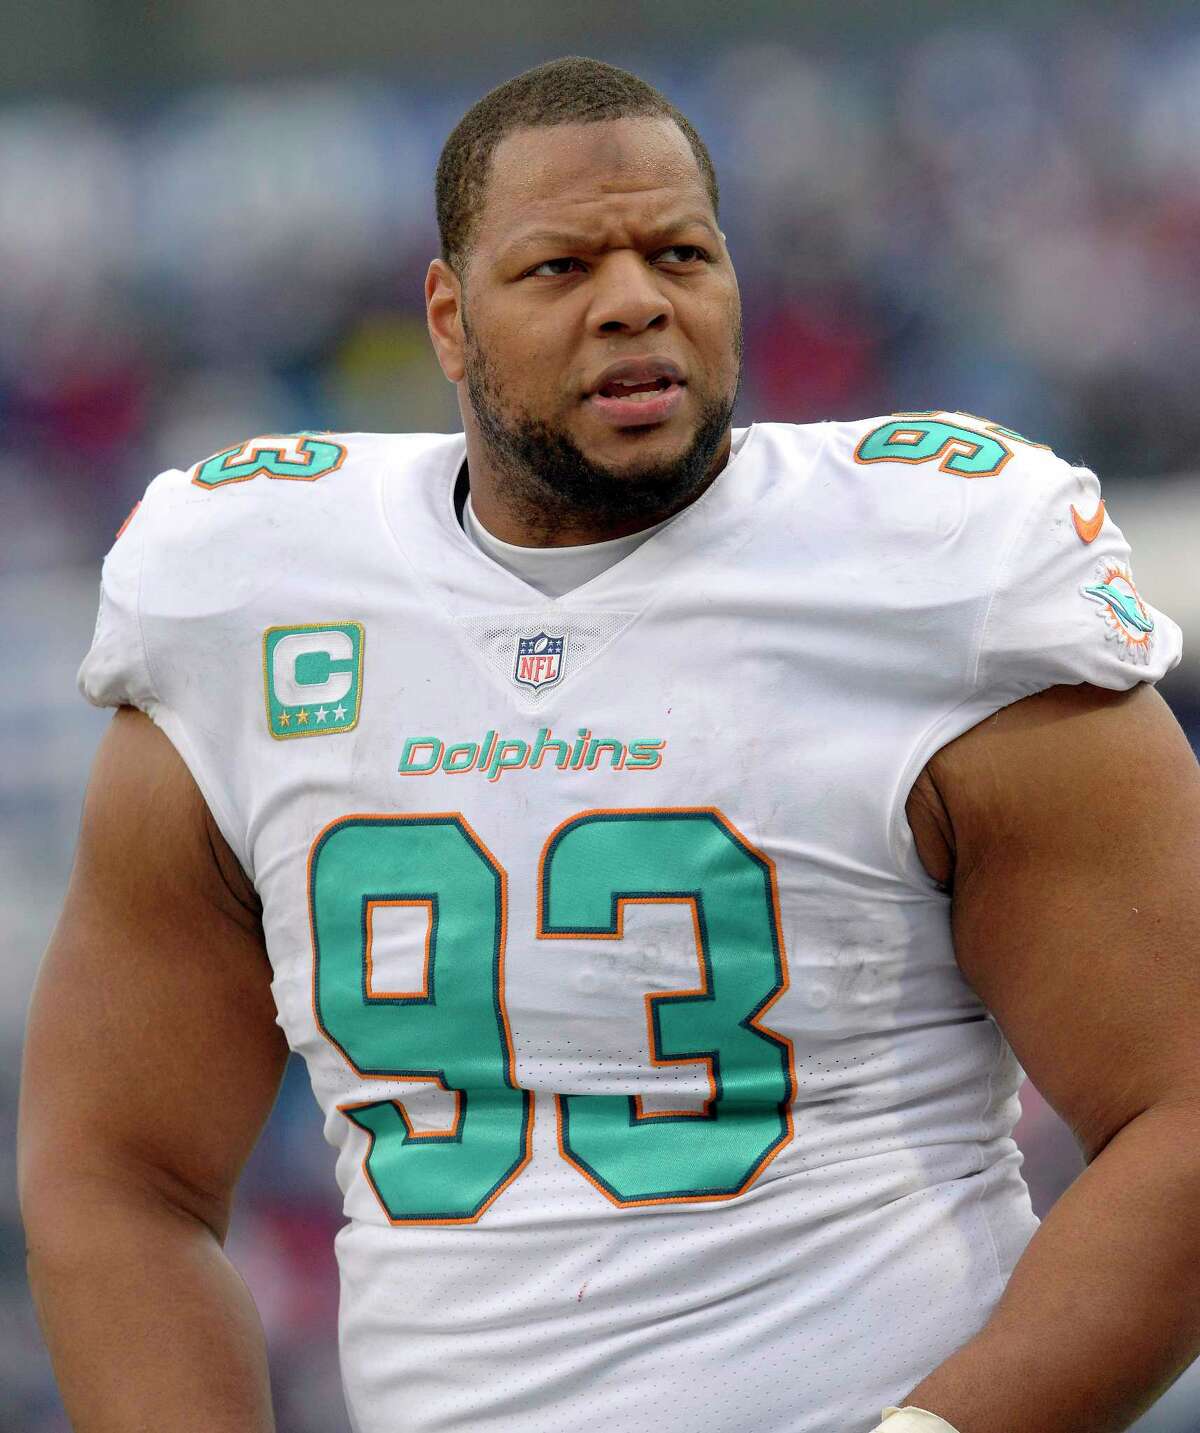 FILE - In this Dec. 17, 2017, file photo, Miami Dolphins defensive tackle Ndamukong Suh (93) looks on from the sideline during the first half of an NFL football game against the Buffalo Bills, in Orchard Park, N.Y. The Miami Dolphins appear ready to move on without their defensive anchor. Miami is discussing releasing five-time Pro Bowl tackle Ndamukong Suh when the NFL's new year begins Wednesday, a person familiar with the situation said Monday, March 12, 2018. The person said nothing has been finalized, and confirmed the conversations to The Associated Press on condition of anonymity because the Dolphins have not commented. (AP Photo/Adrian Kraus, File)